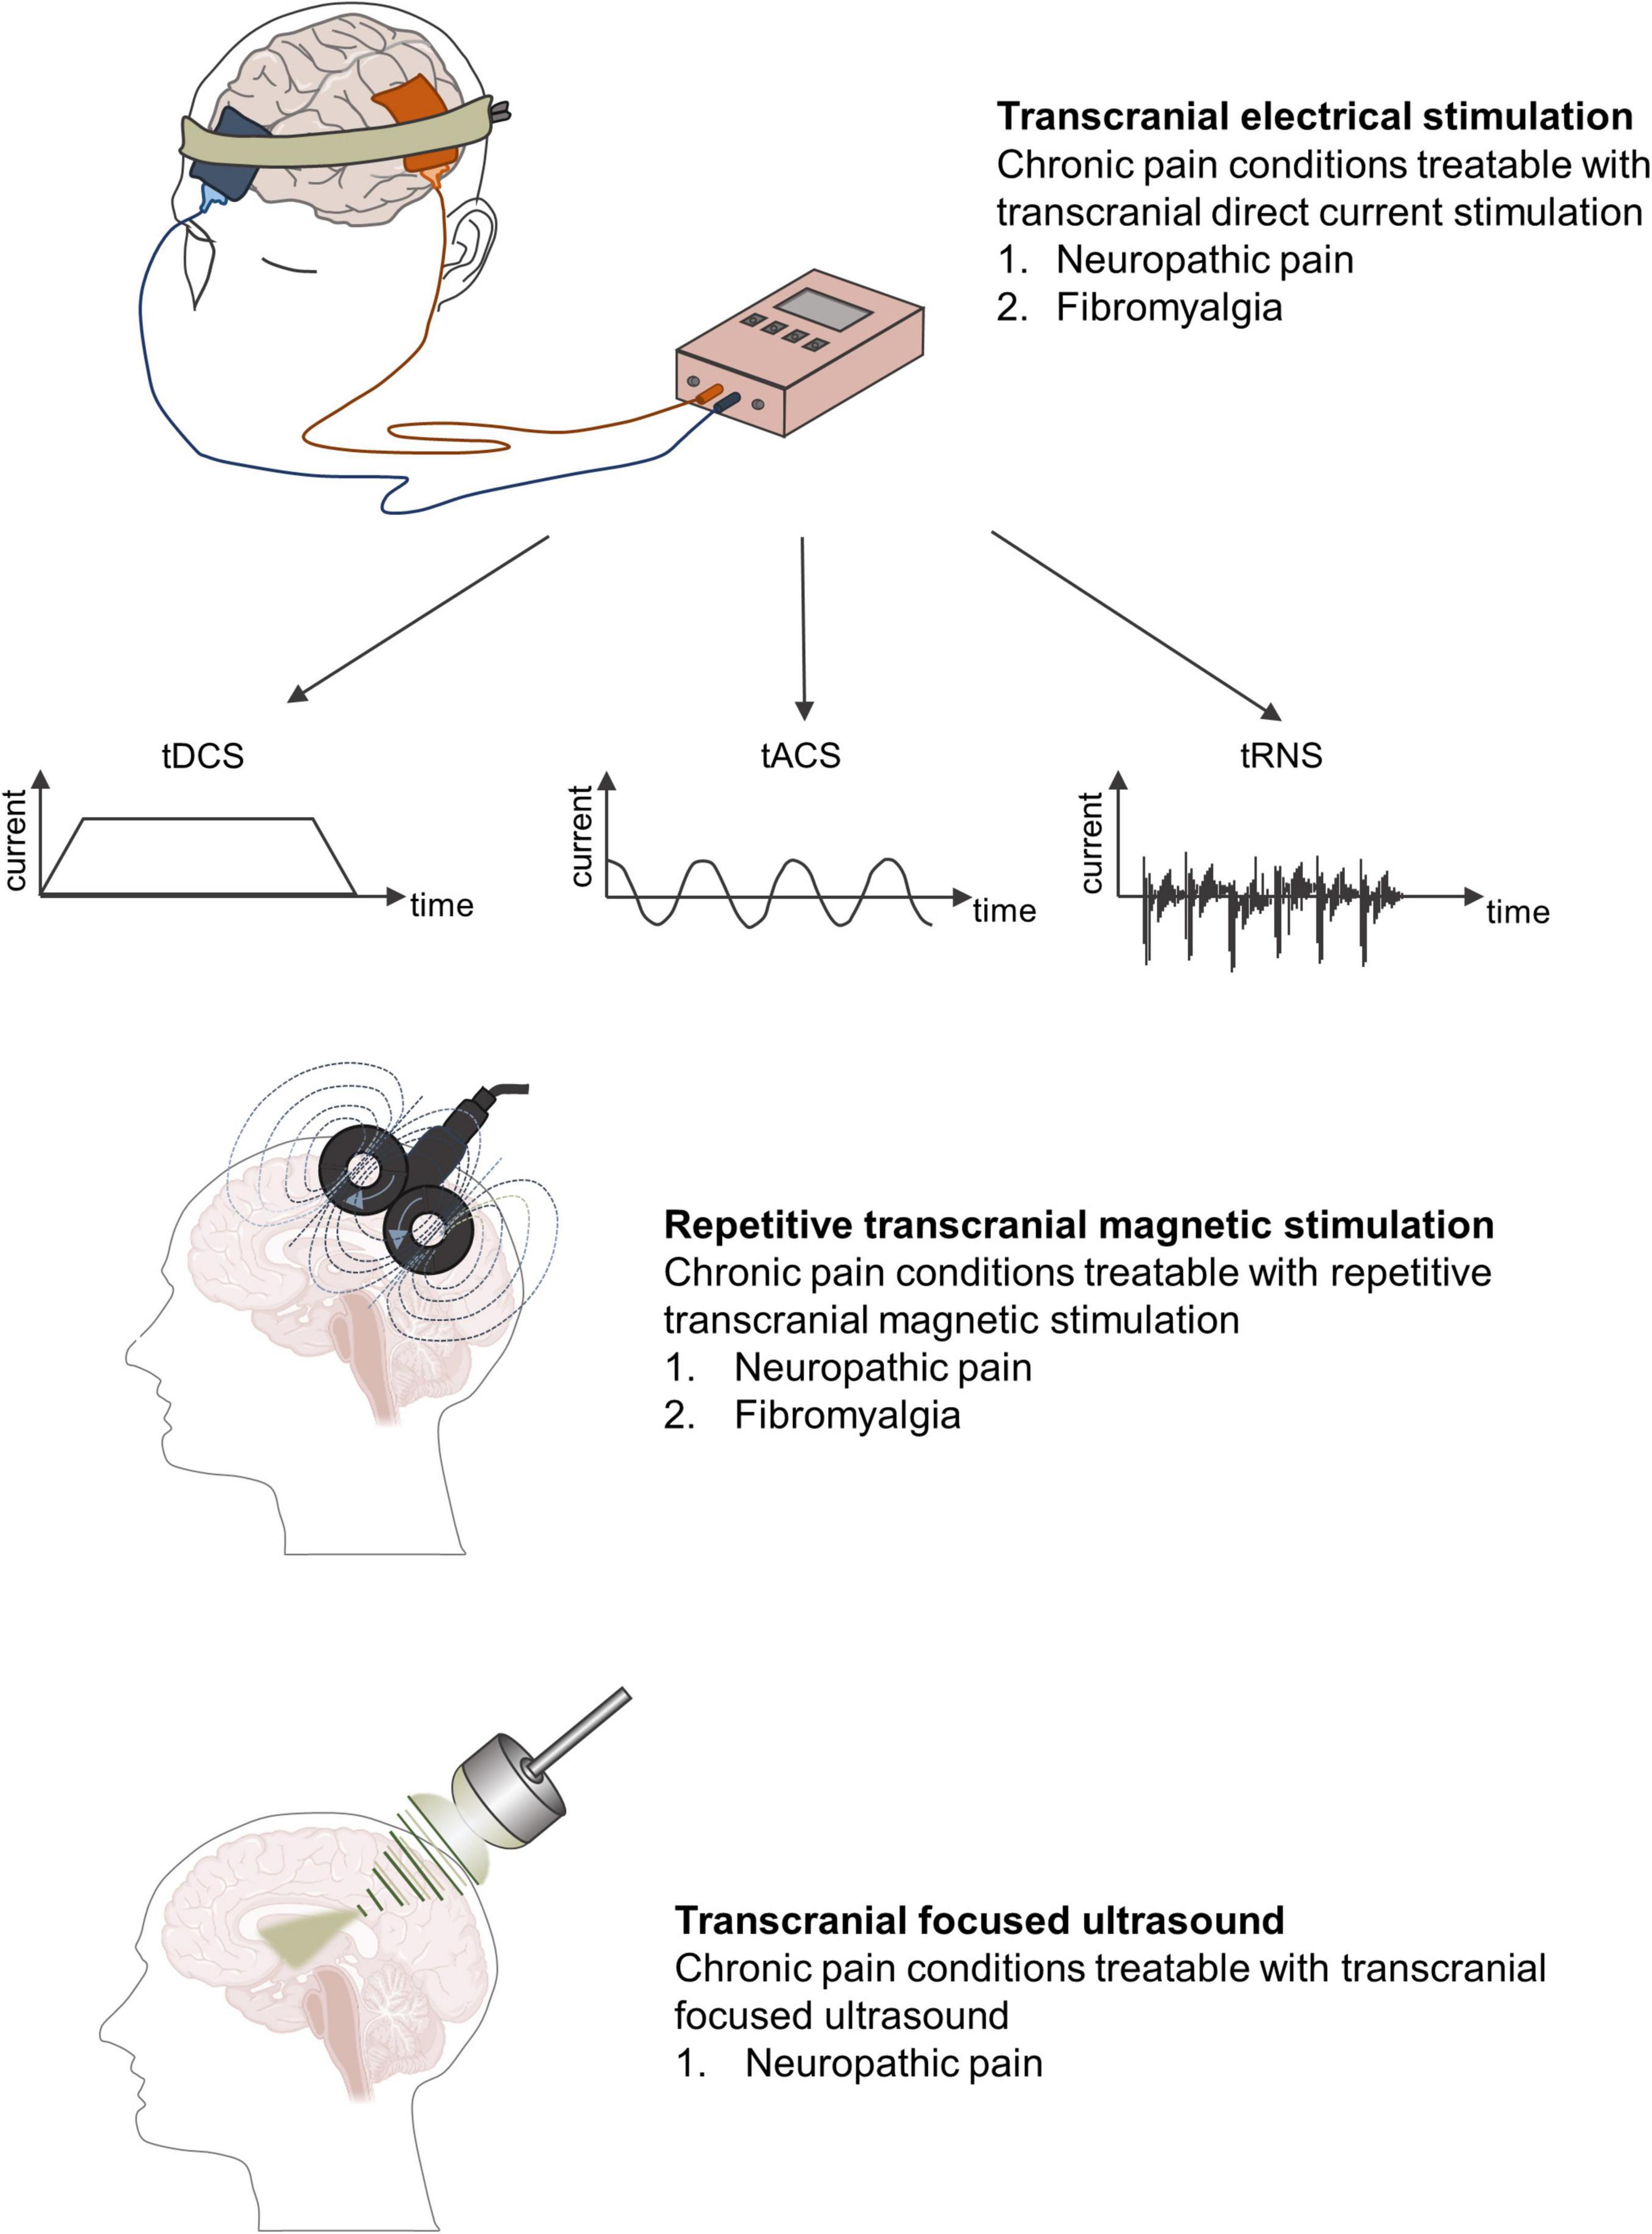 Treat Pain With Non-Drug Non-Invasive Electrical Stimulation